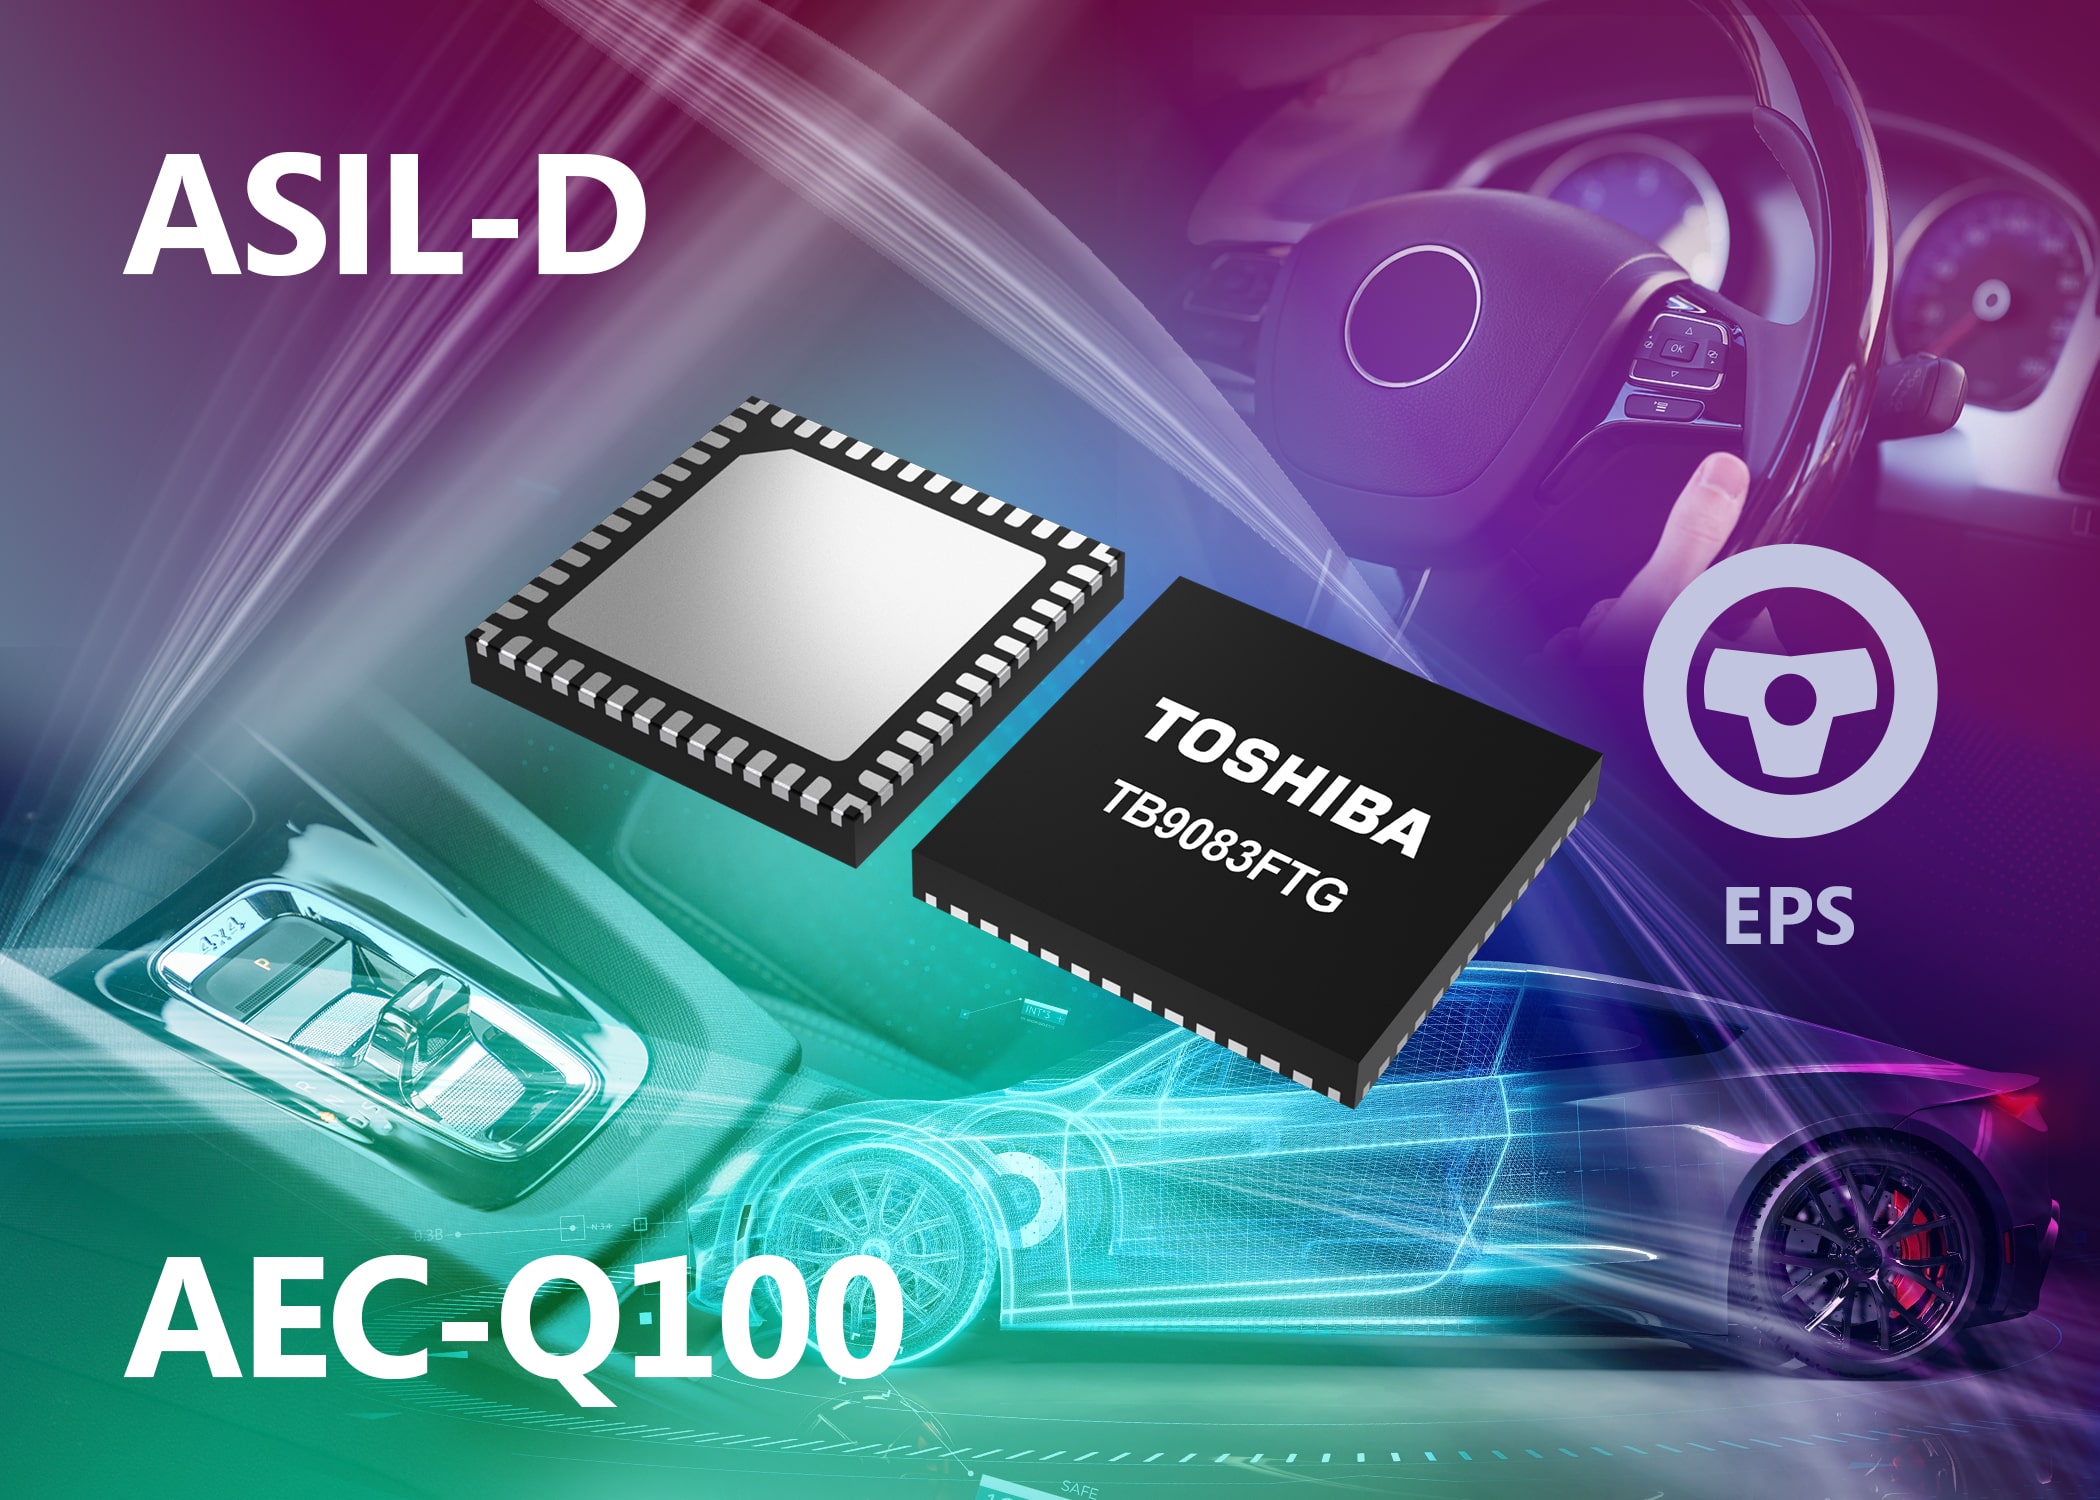 Toshibaâ€™s highly-compact automotive-grade BLDC motor gate driver is now in volume production